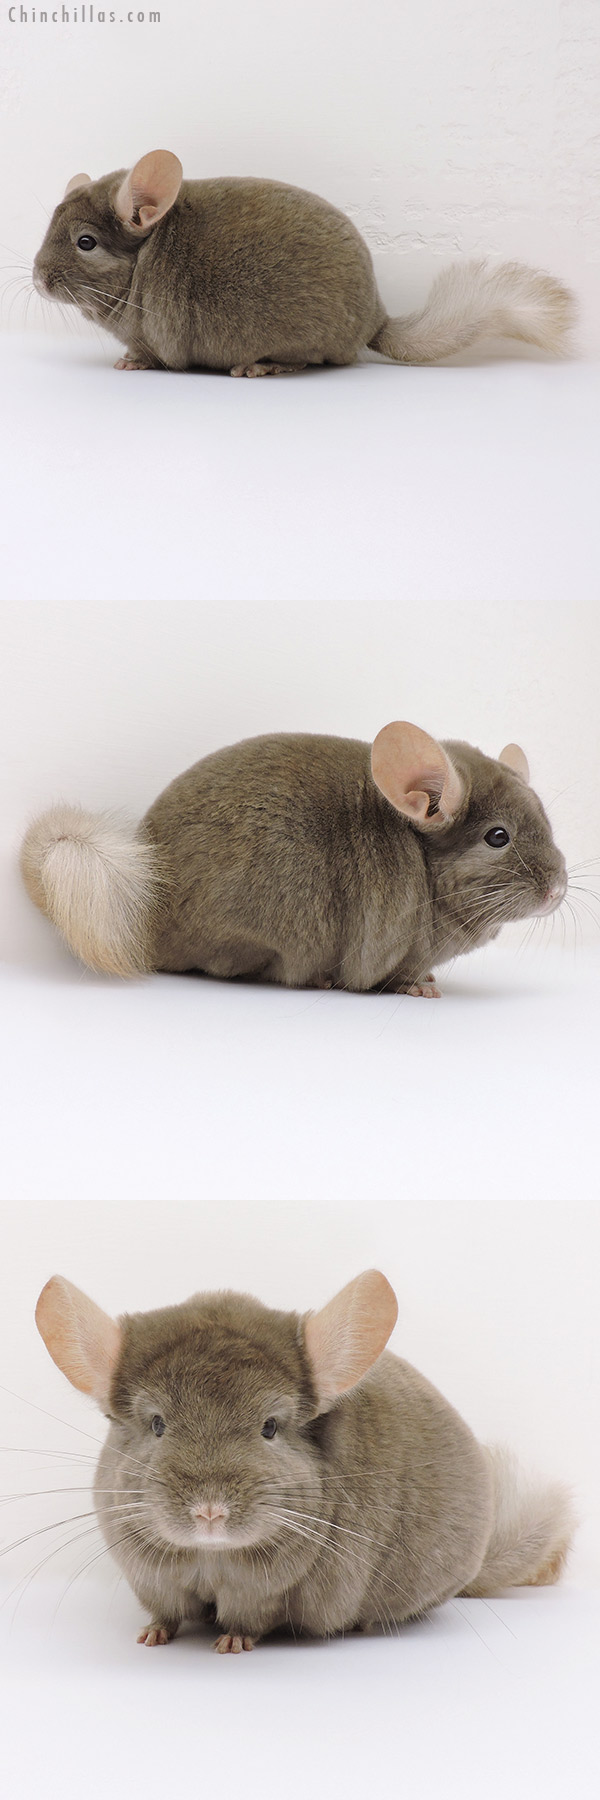 Chinchilla or related item offered for sale or export on Chinchillas.com - 16220 Tan Male Chinchilla